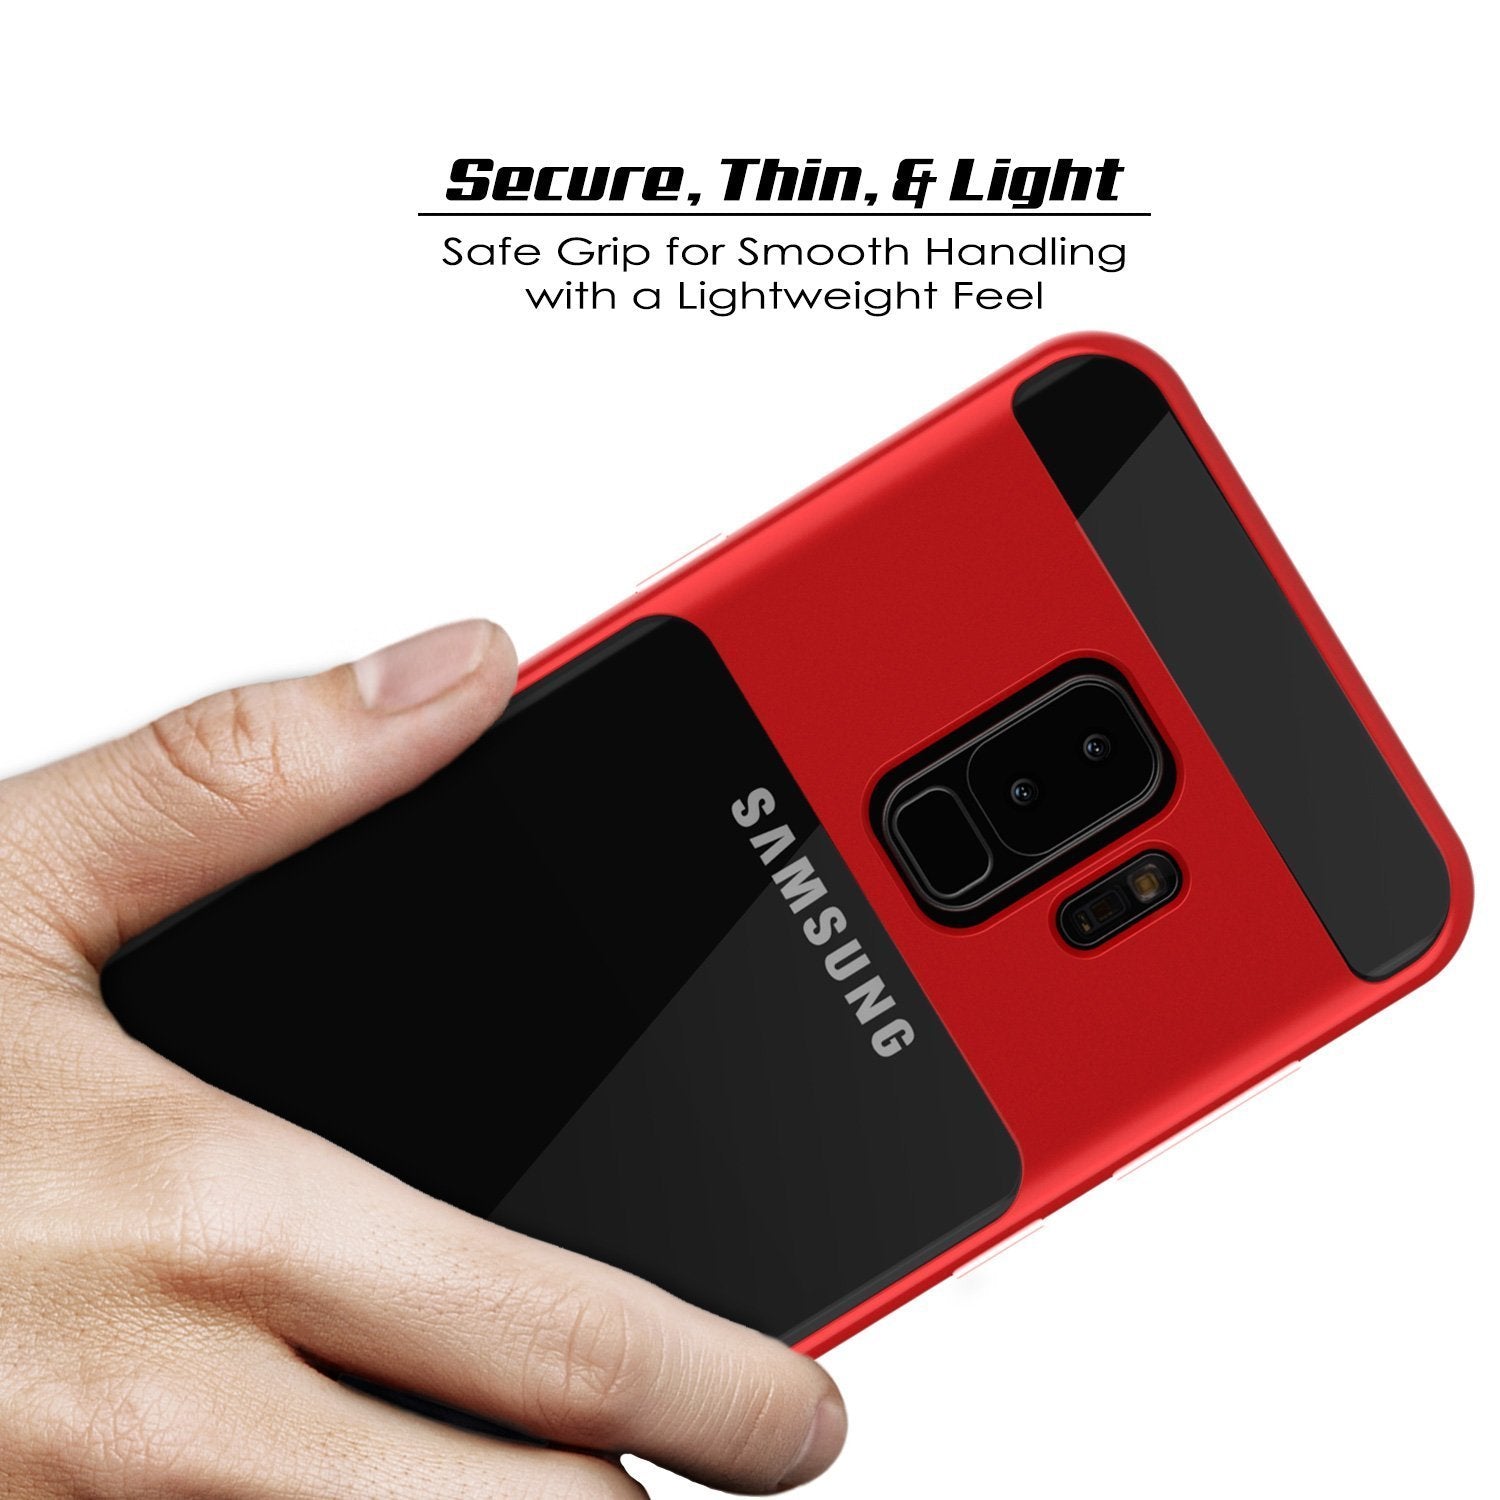 Galaxy S9+ Plus Case, PUNKcase [LUCID 3.0 Series] [Slim Fit] [Clear Back] Armor Cover w/ Integrated Kickstand, Anti-Shock System & PUNKSHIELD Screen Protector for Samsung Galaxy S9+ Plus [Red]